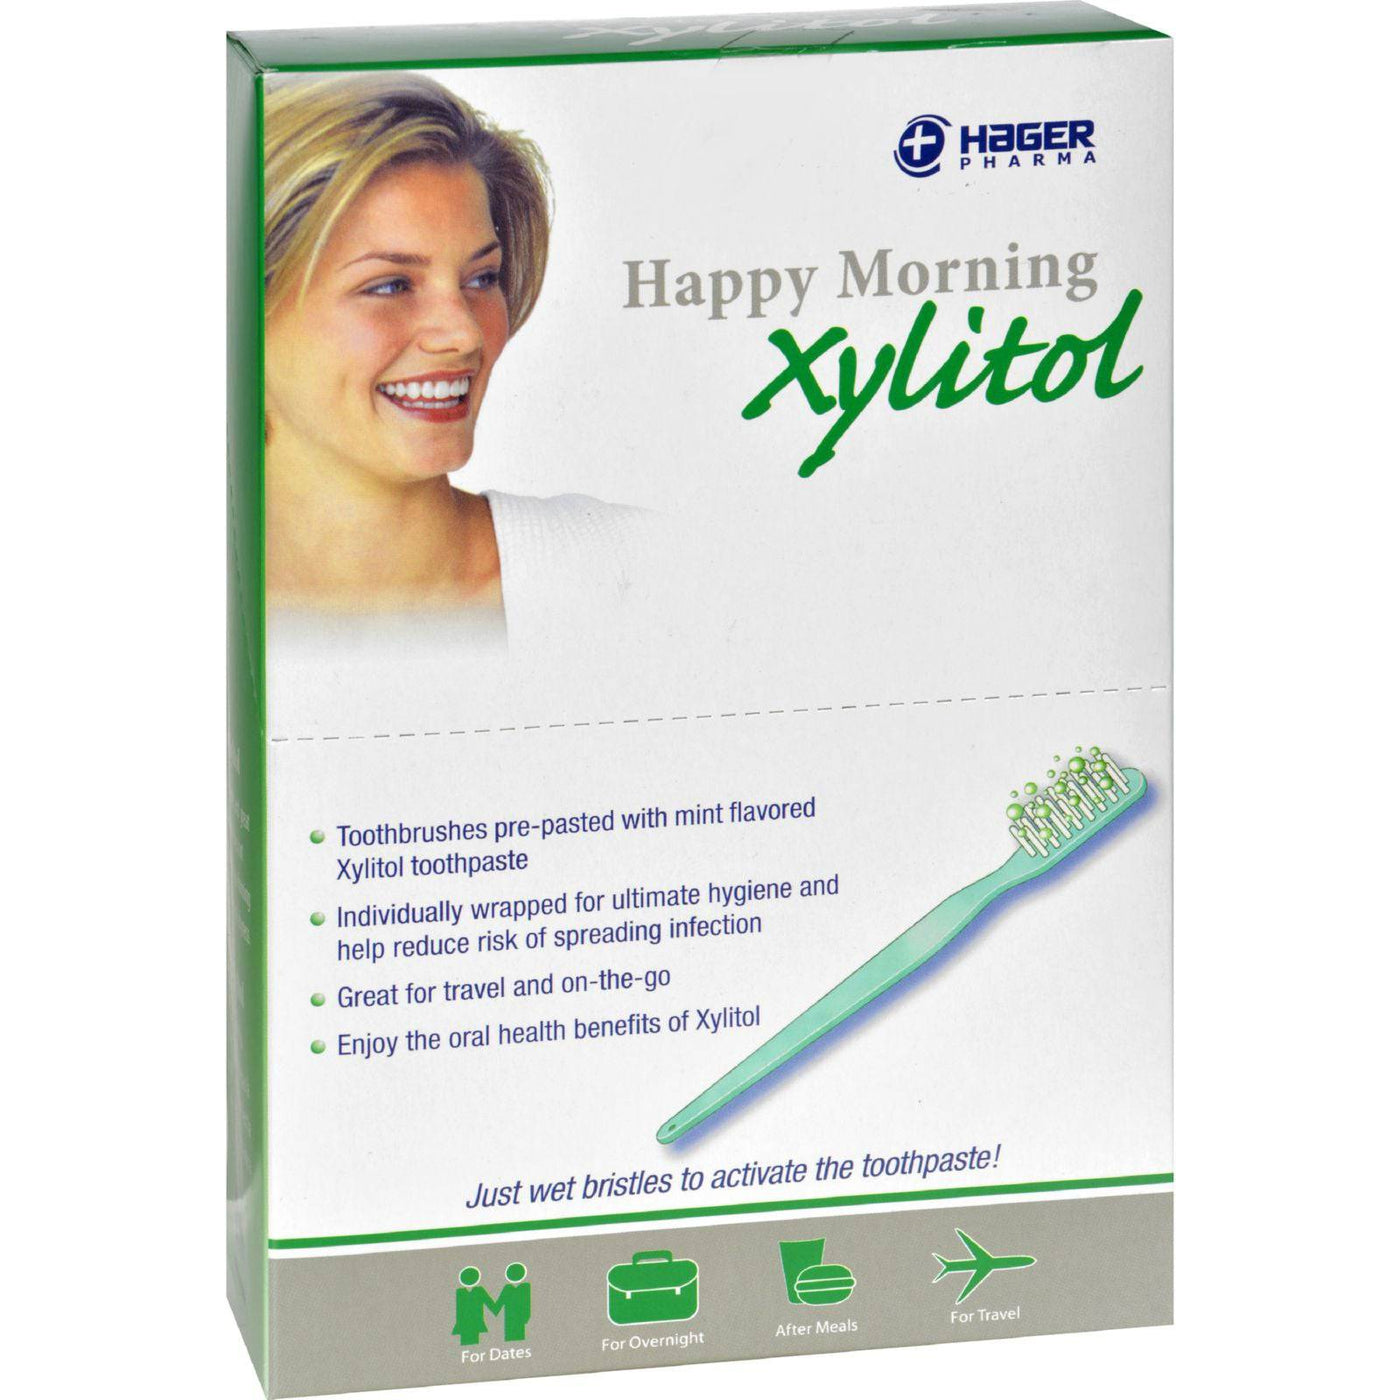 Hager Pharma Toothbrush - With Xylitol - Happy Morning - 1 Case | OnlyNaturals.us